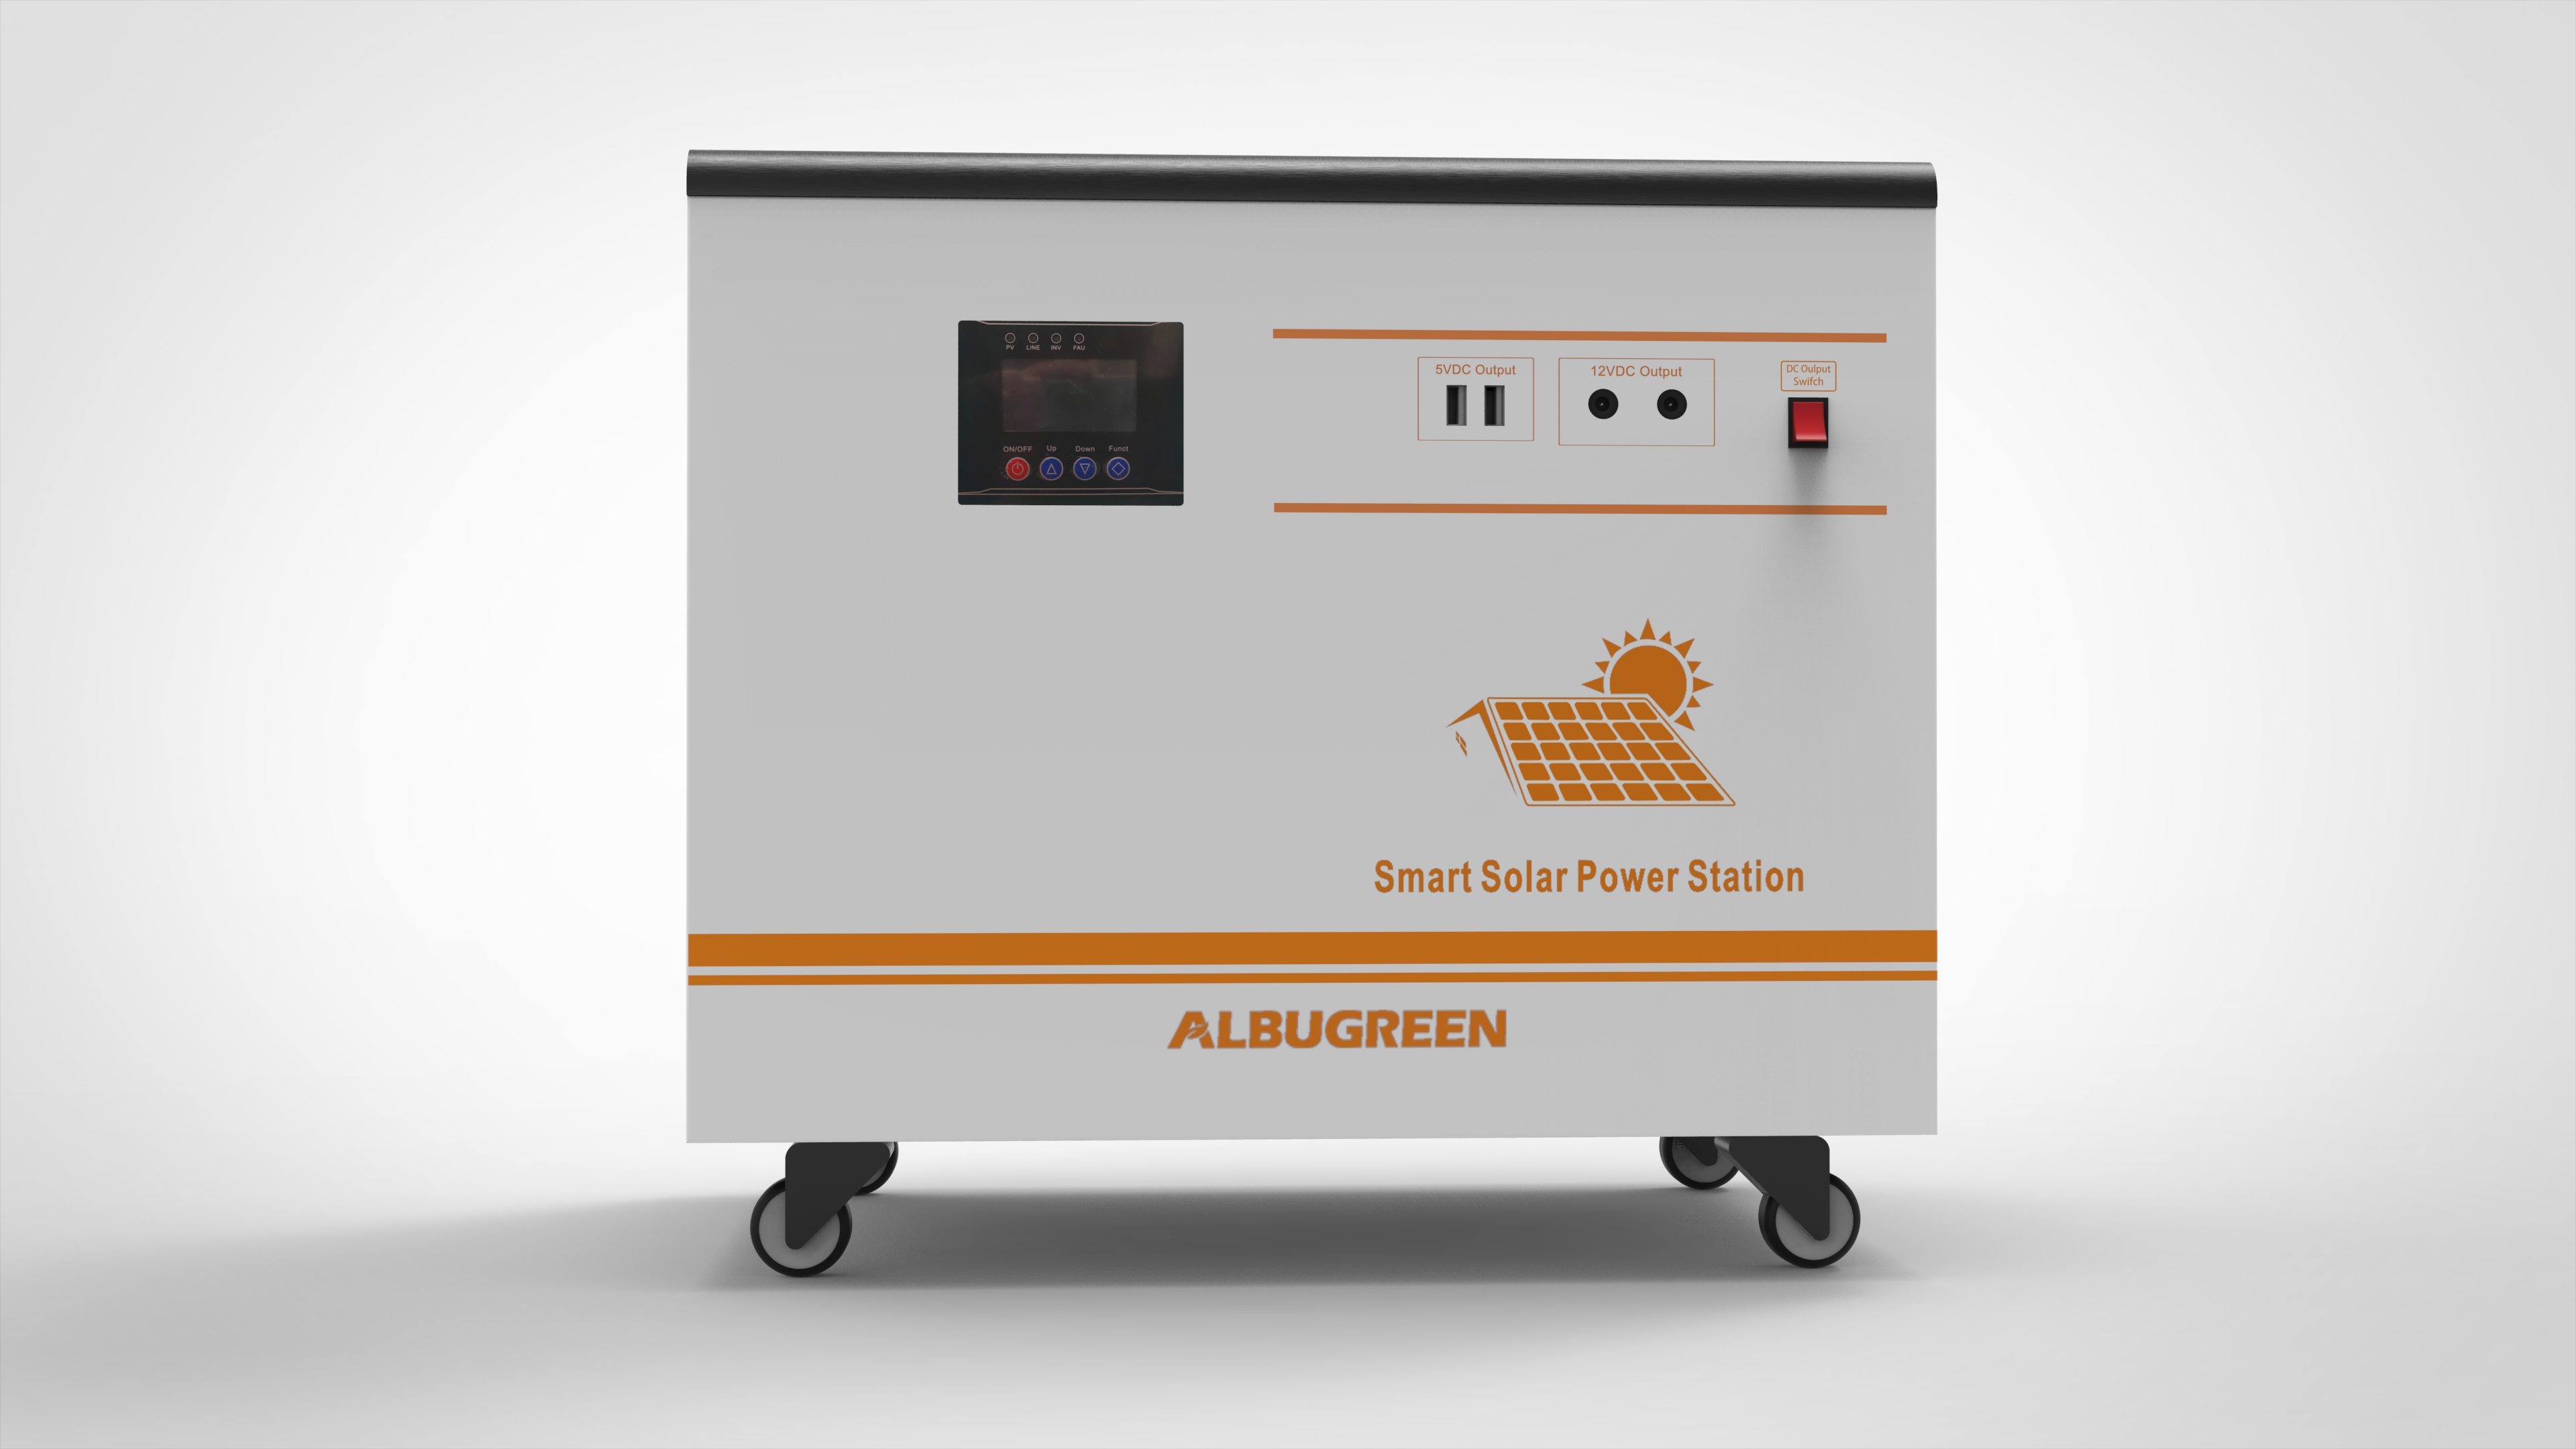 3000w 110v with Battery Ports in One Solar Power System for Camper